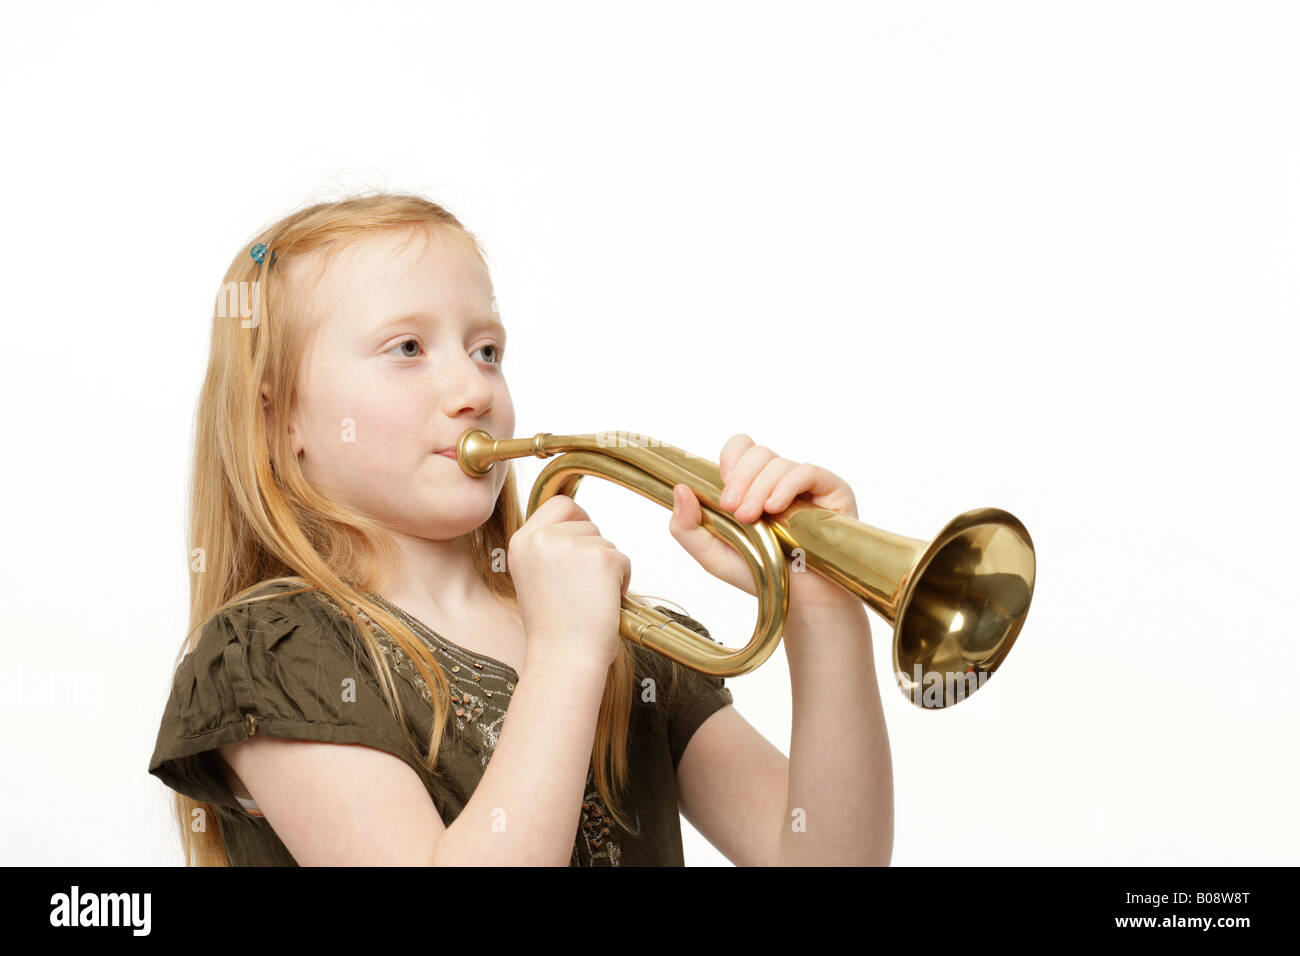 835 Little Girl Plays Trumpet Images, Stock Photos, 3D objects